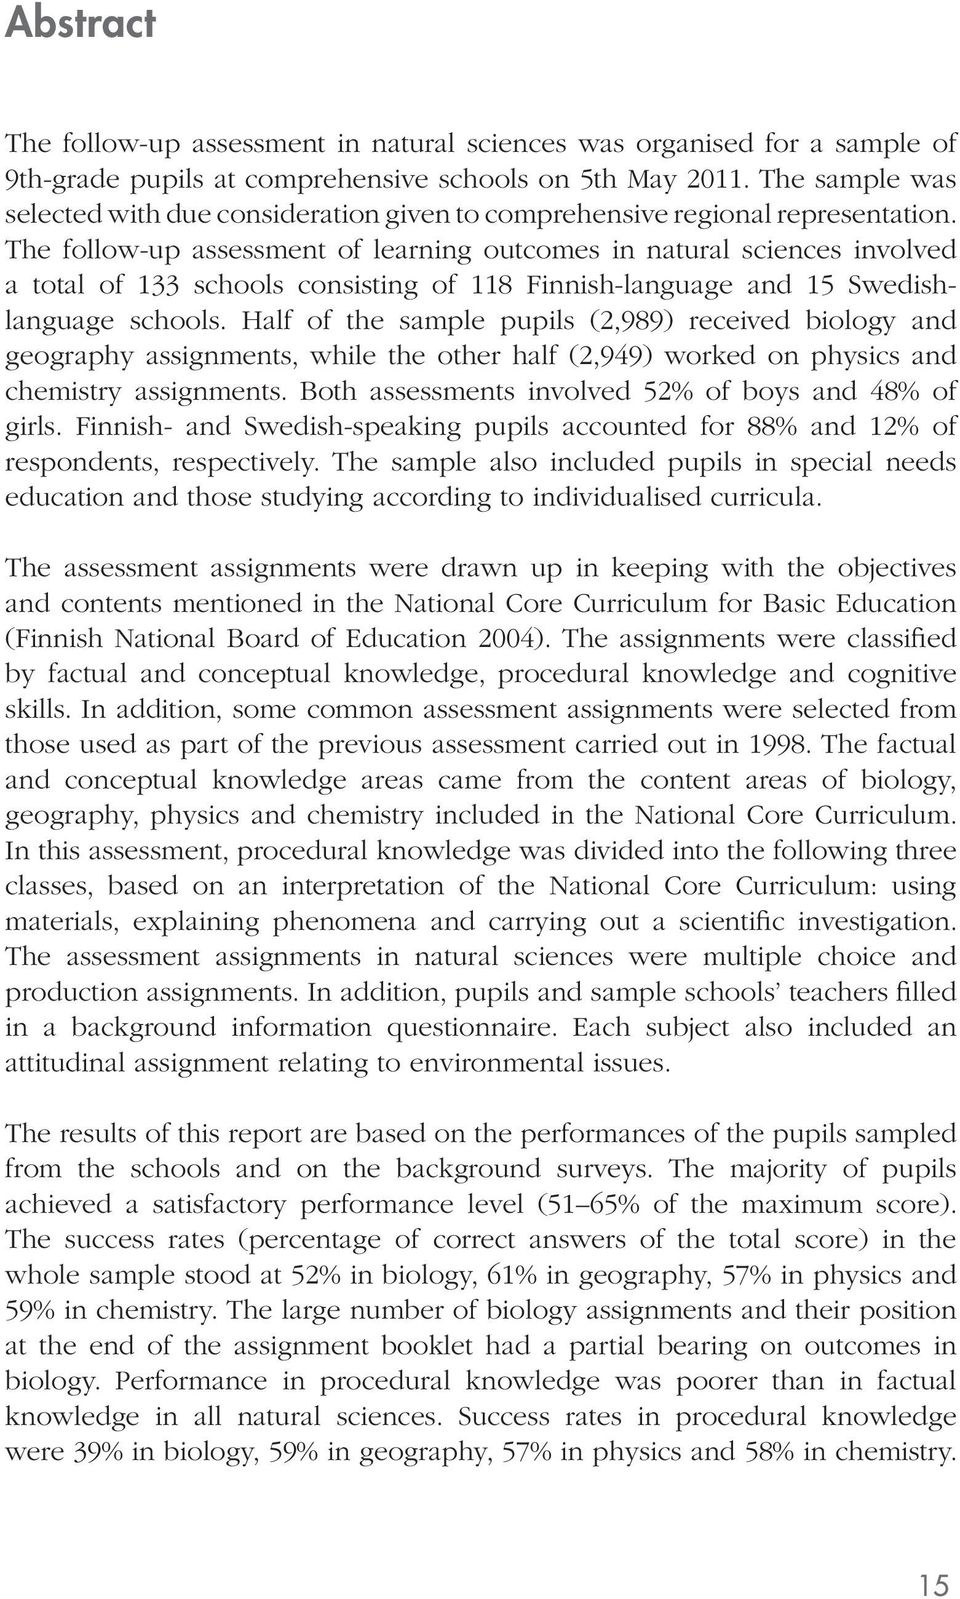 The follow-up assessment of learning outcomes in natural sciences involved a total of 133 schools consisting of 118 Finnish-language and 15 Swedishlanguage schools.